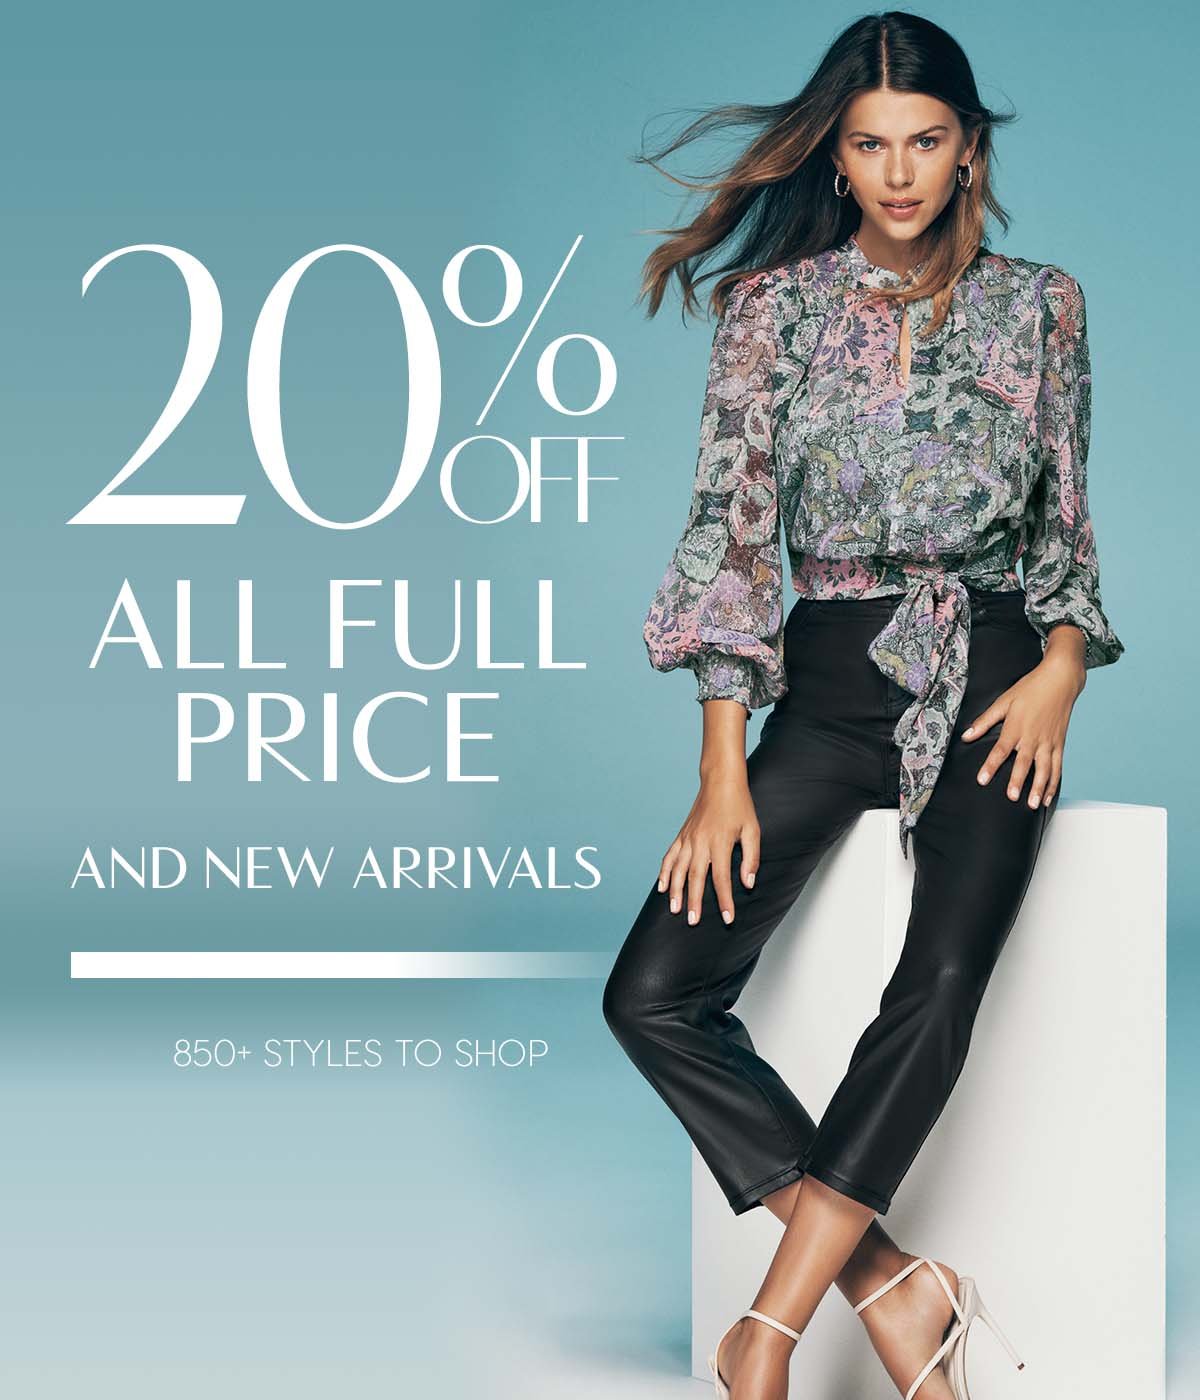 20% Off All Full Price And New Arrivals. 850+ Styles To Shop